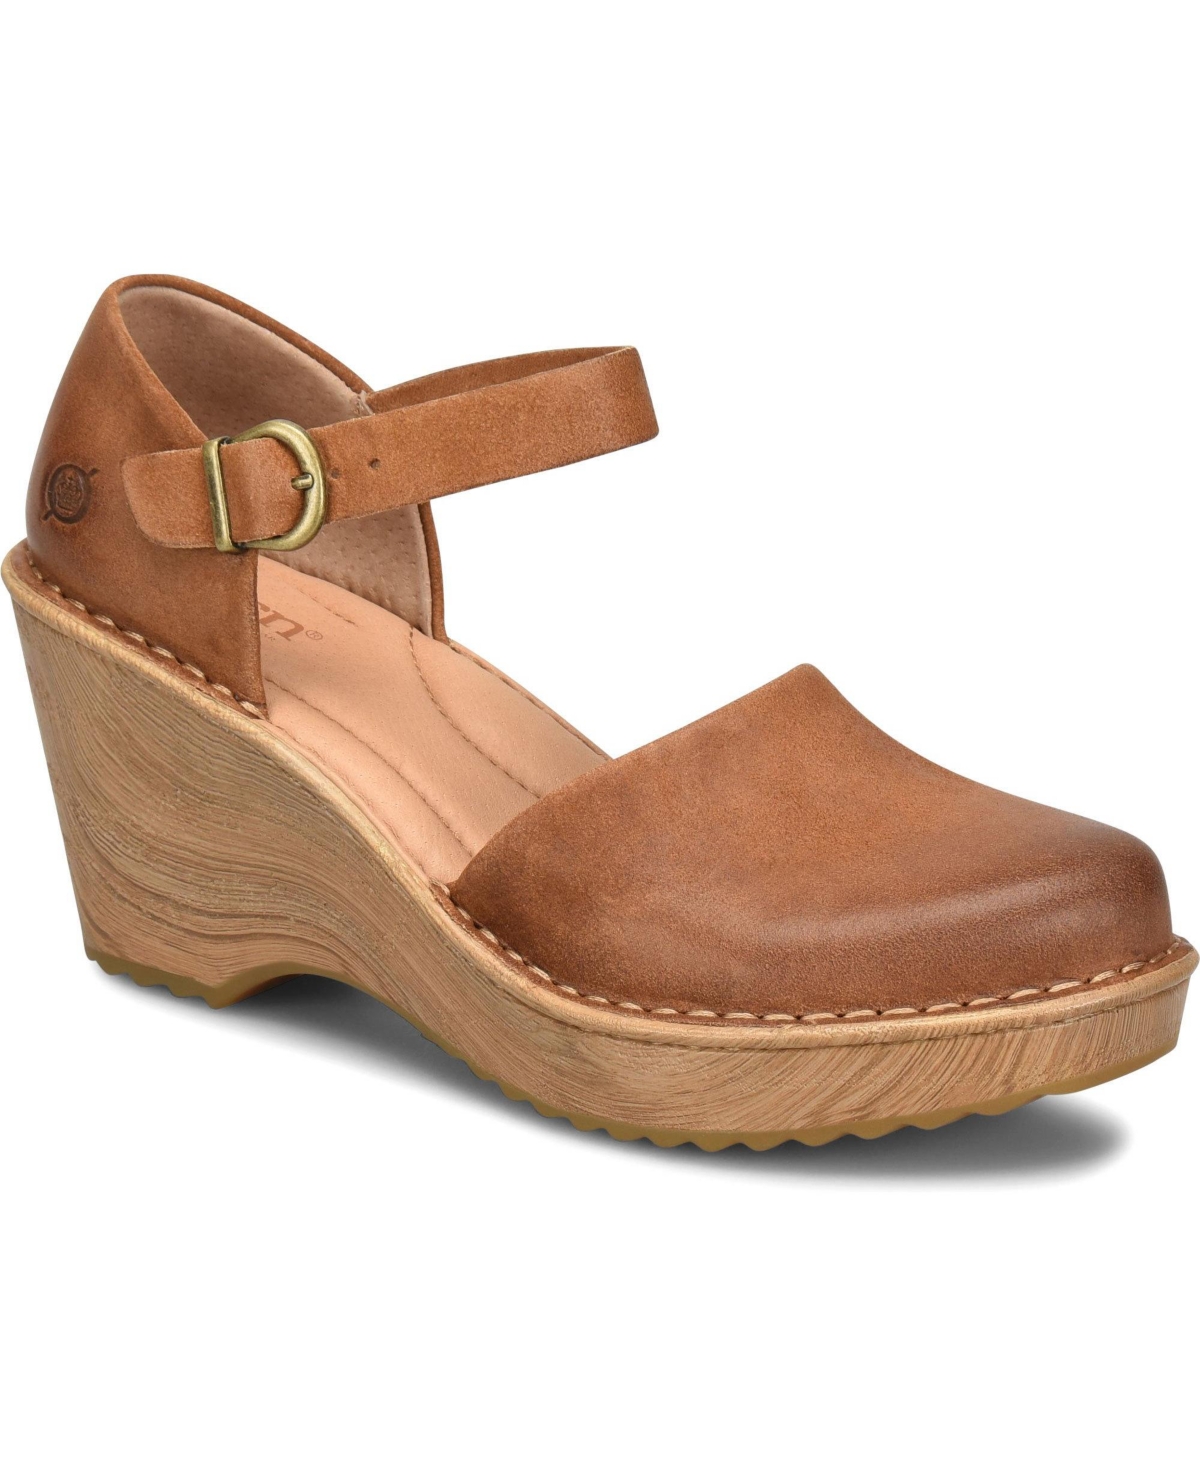 Born Women's Nellie Comfort Mary Jane Wedges Women's Shoes